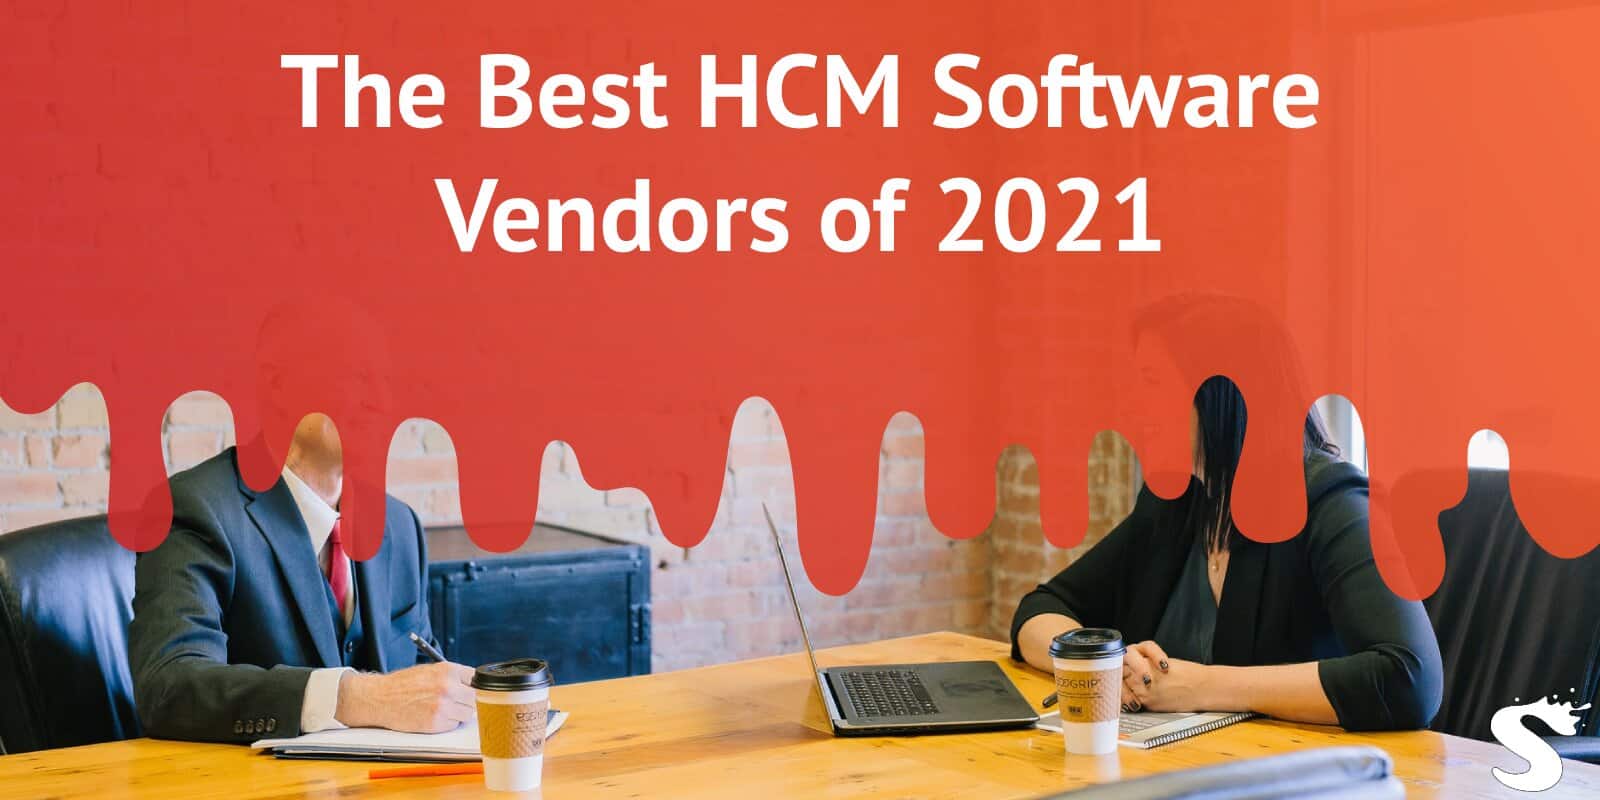 The Best HCM Software Vendors of 2021